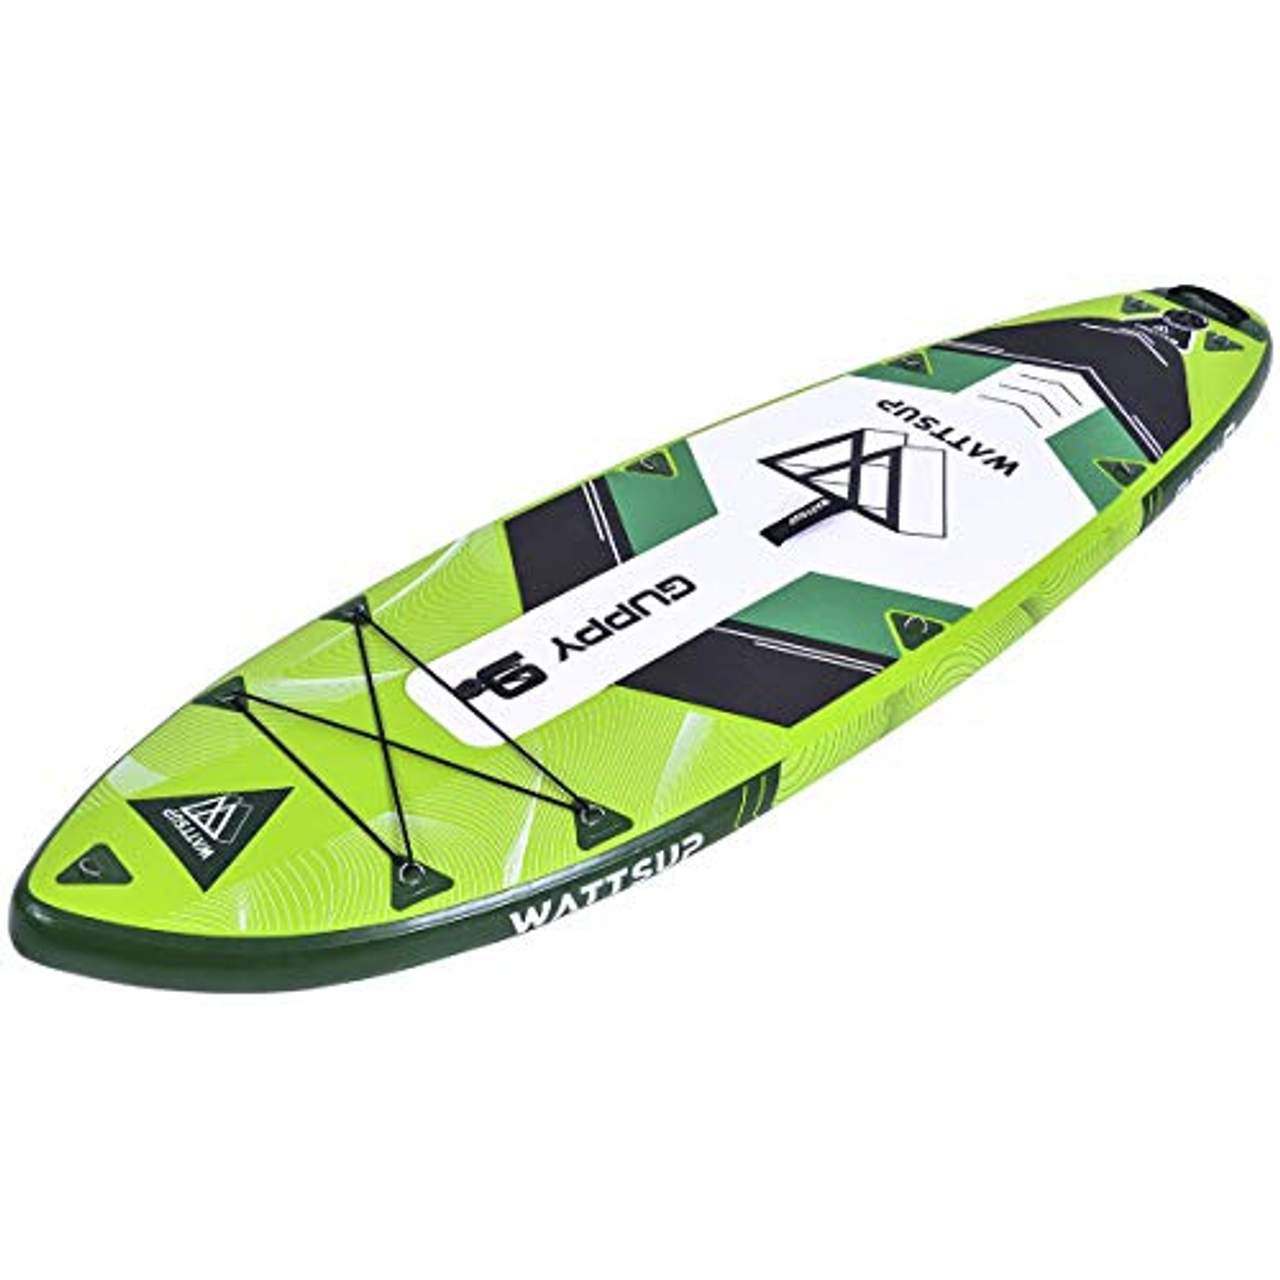 WS WattSUP Guppy 9’0” SUP Board Stand Up Paddle v